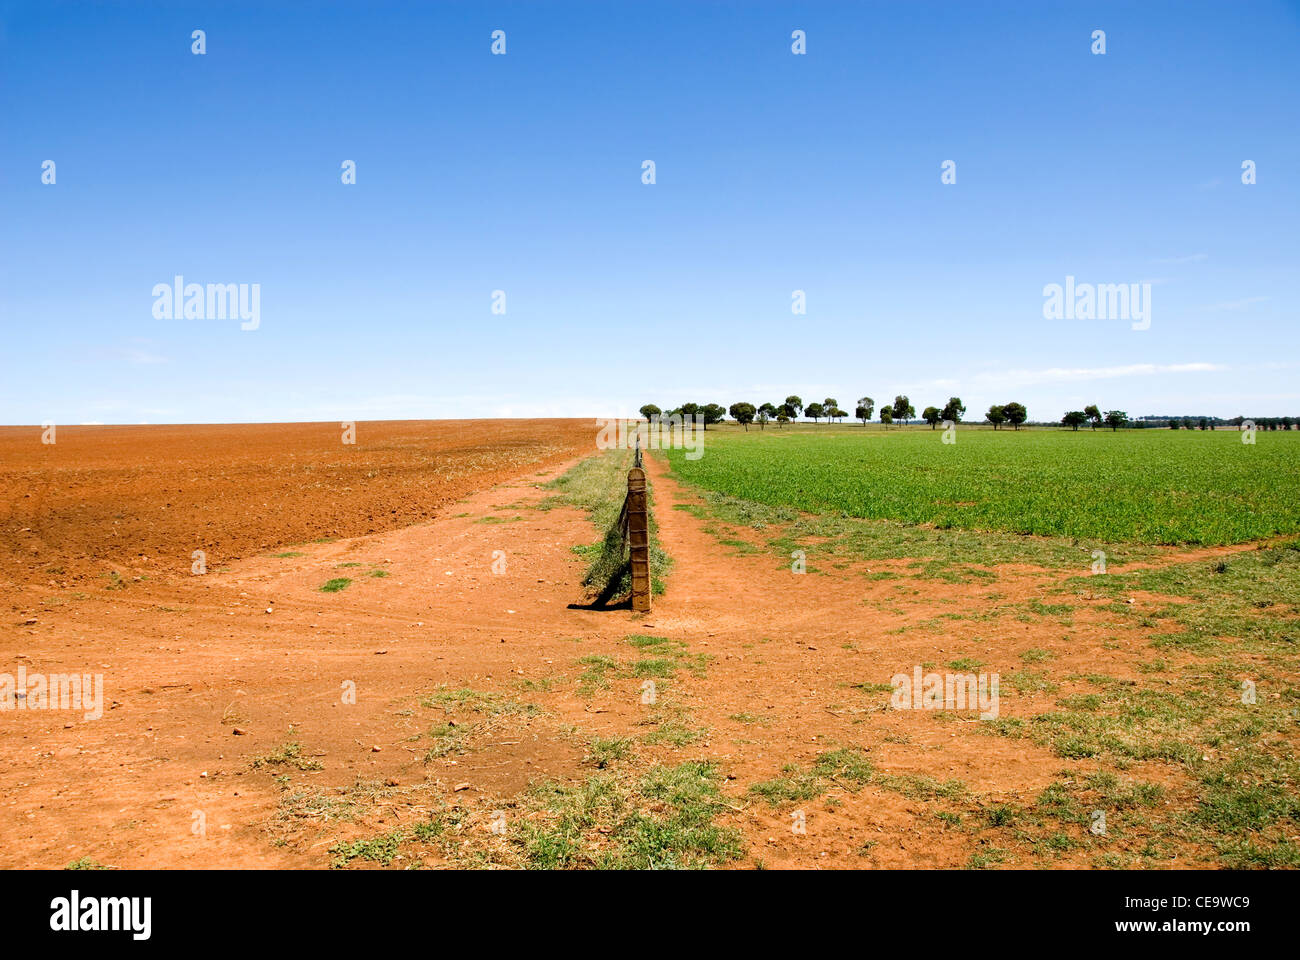 A fence dividing two paddock in farmland near Cootamundra in New South Wales, Australia Stock Photo